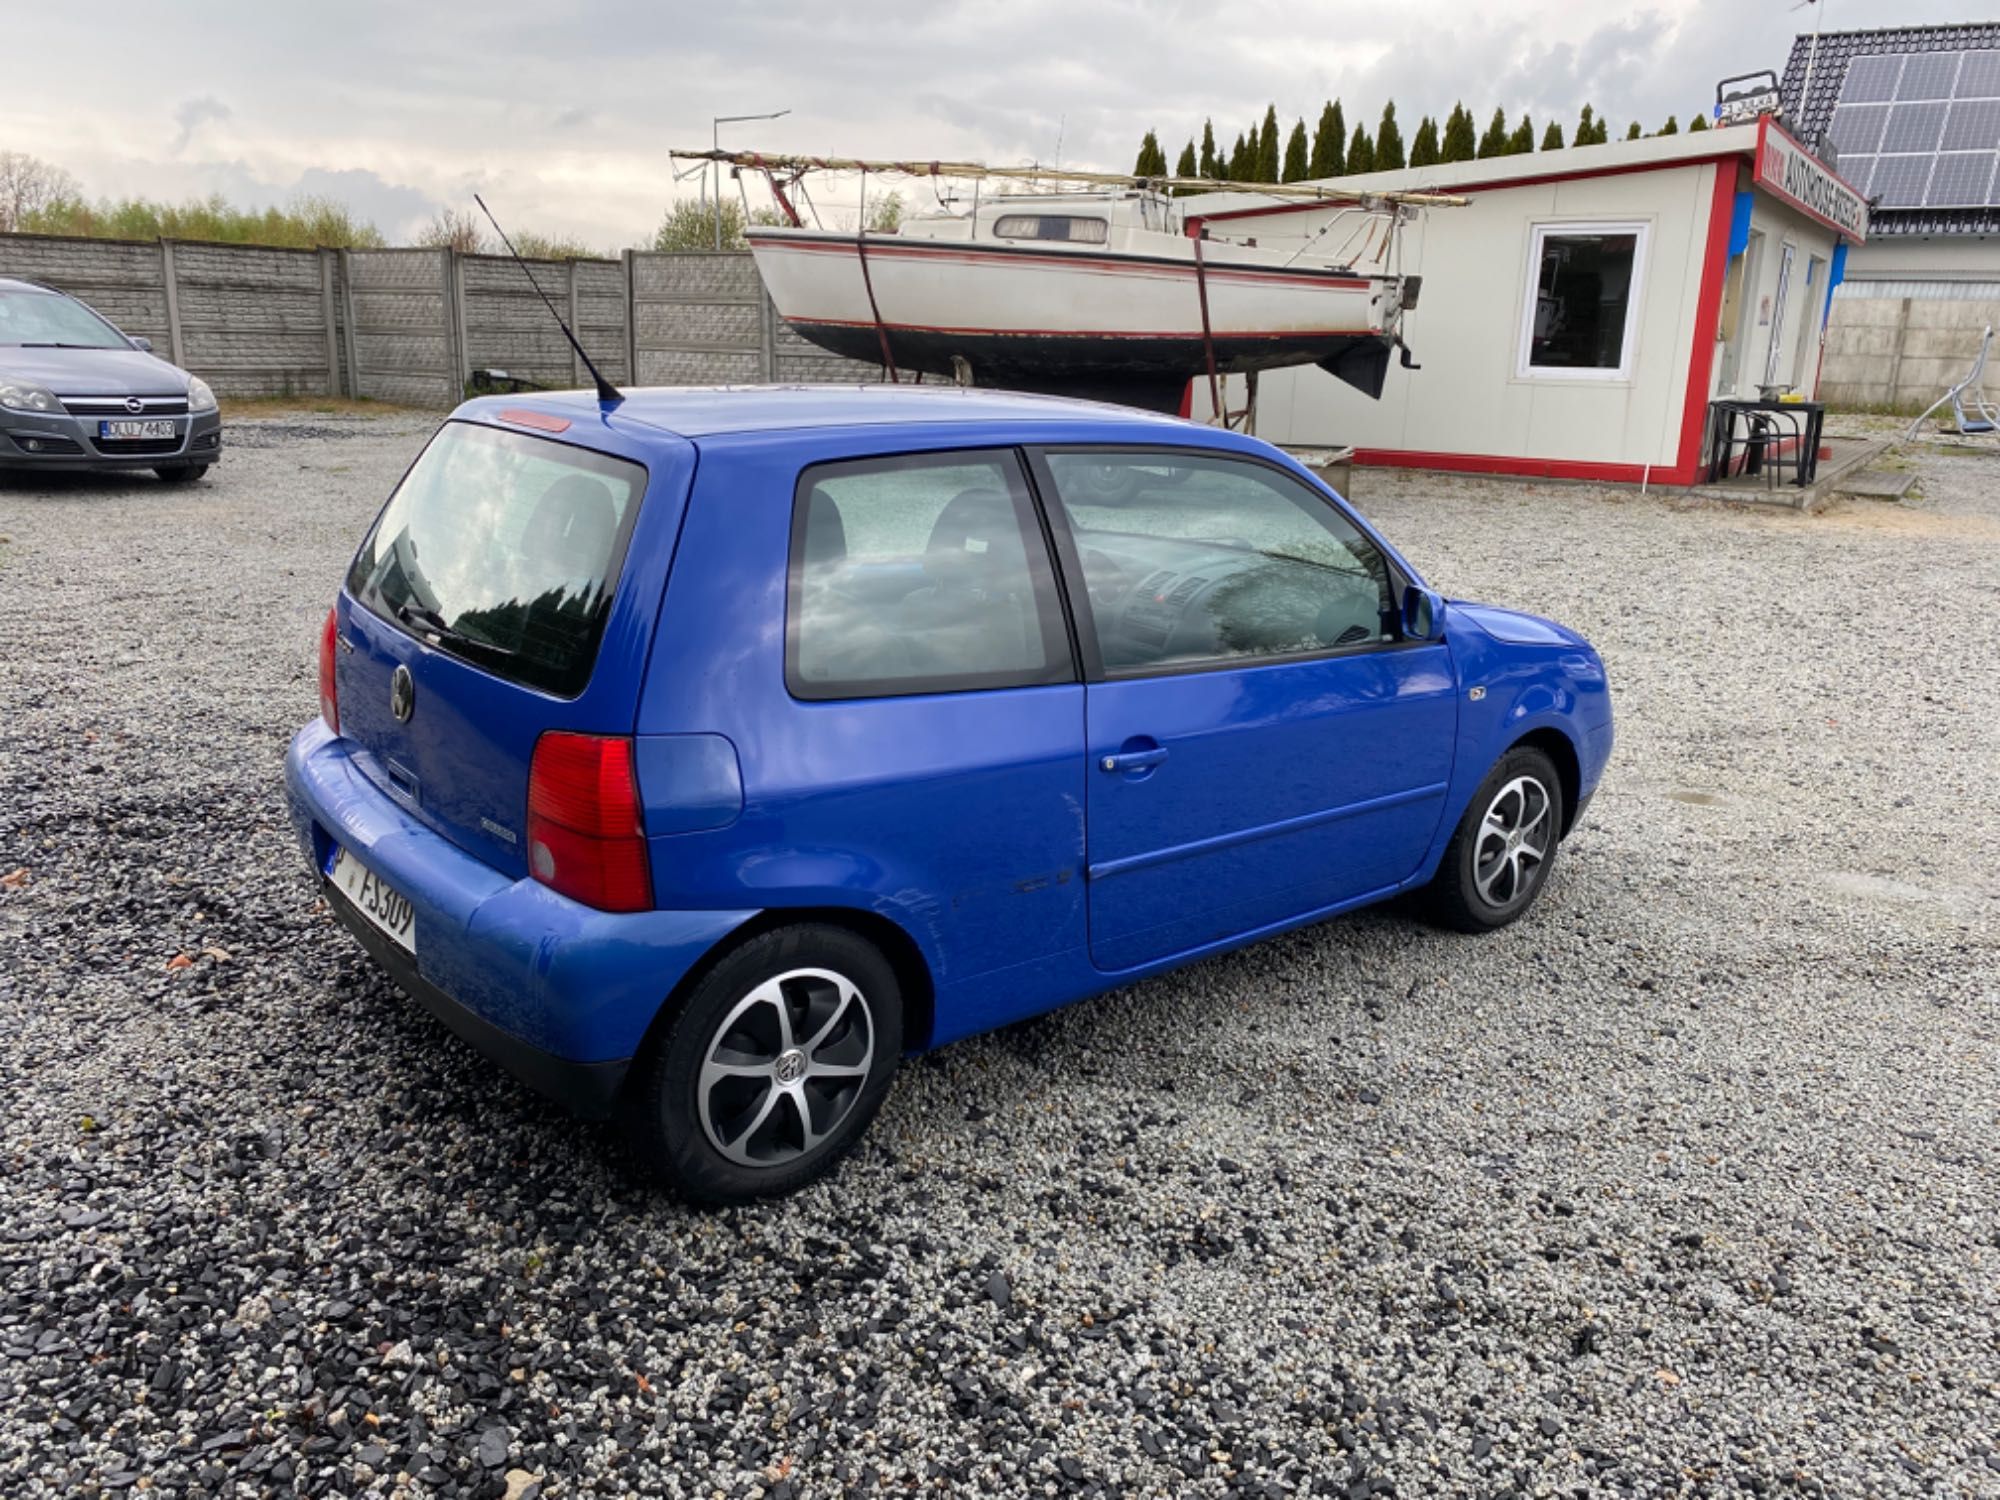 VW Lupo 1.4 benzyna